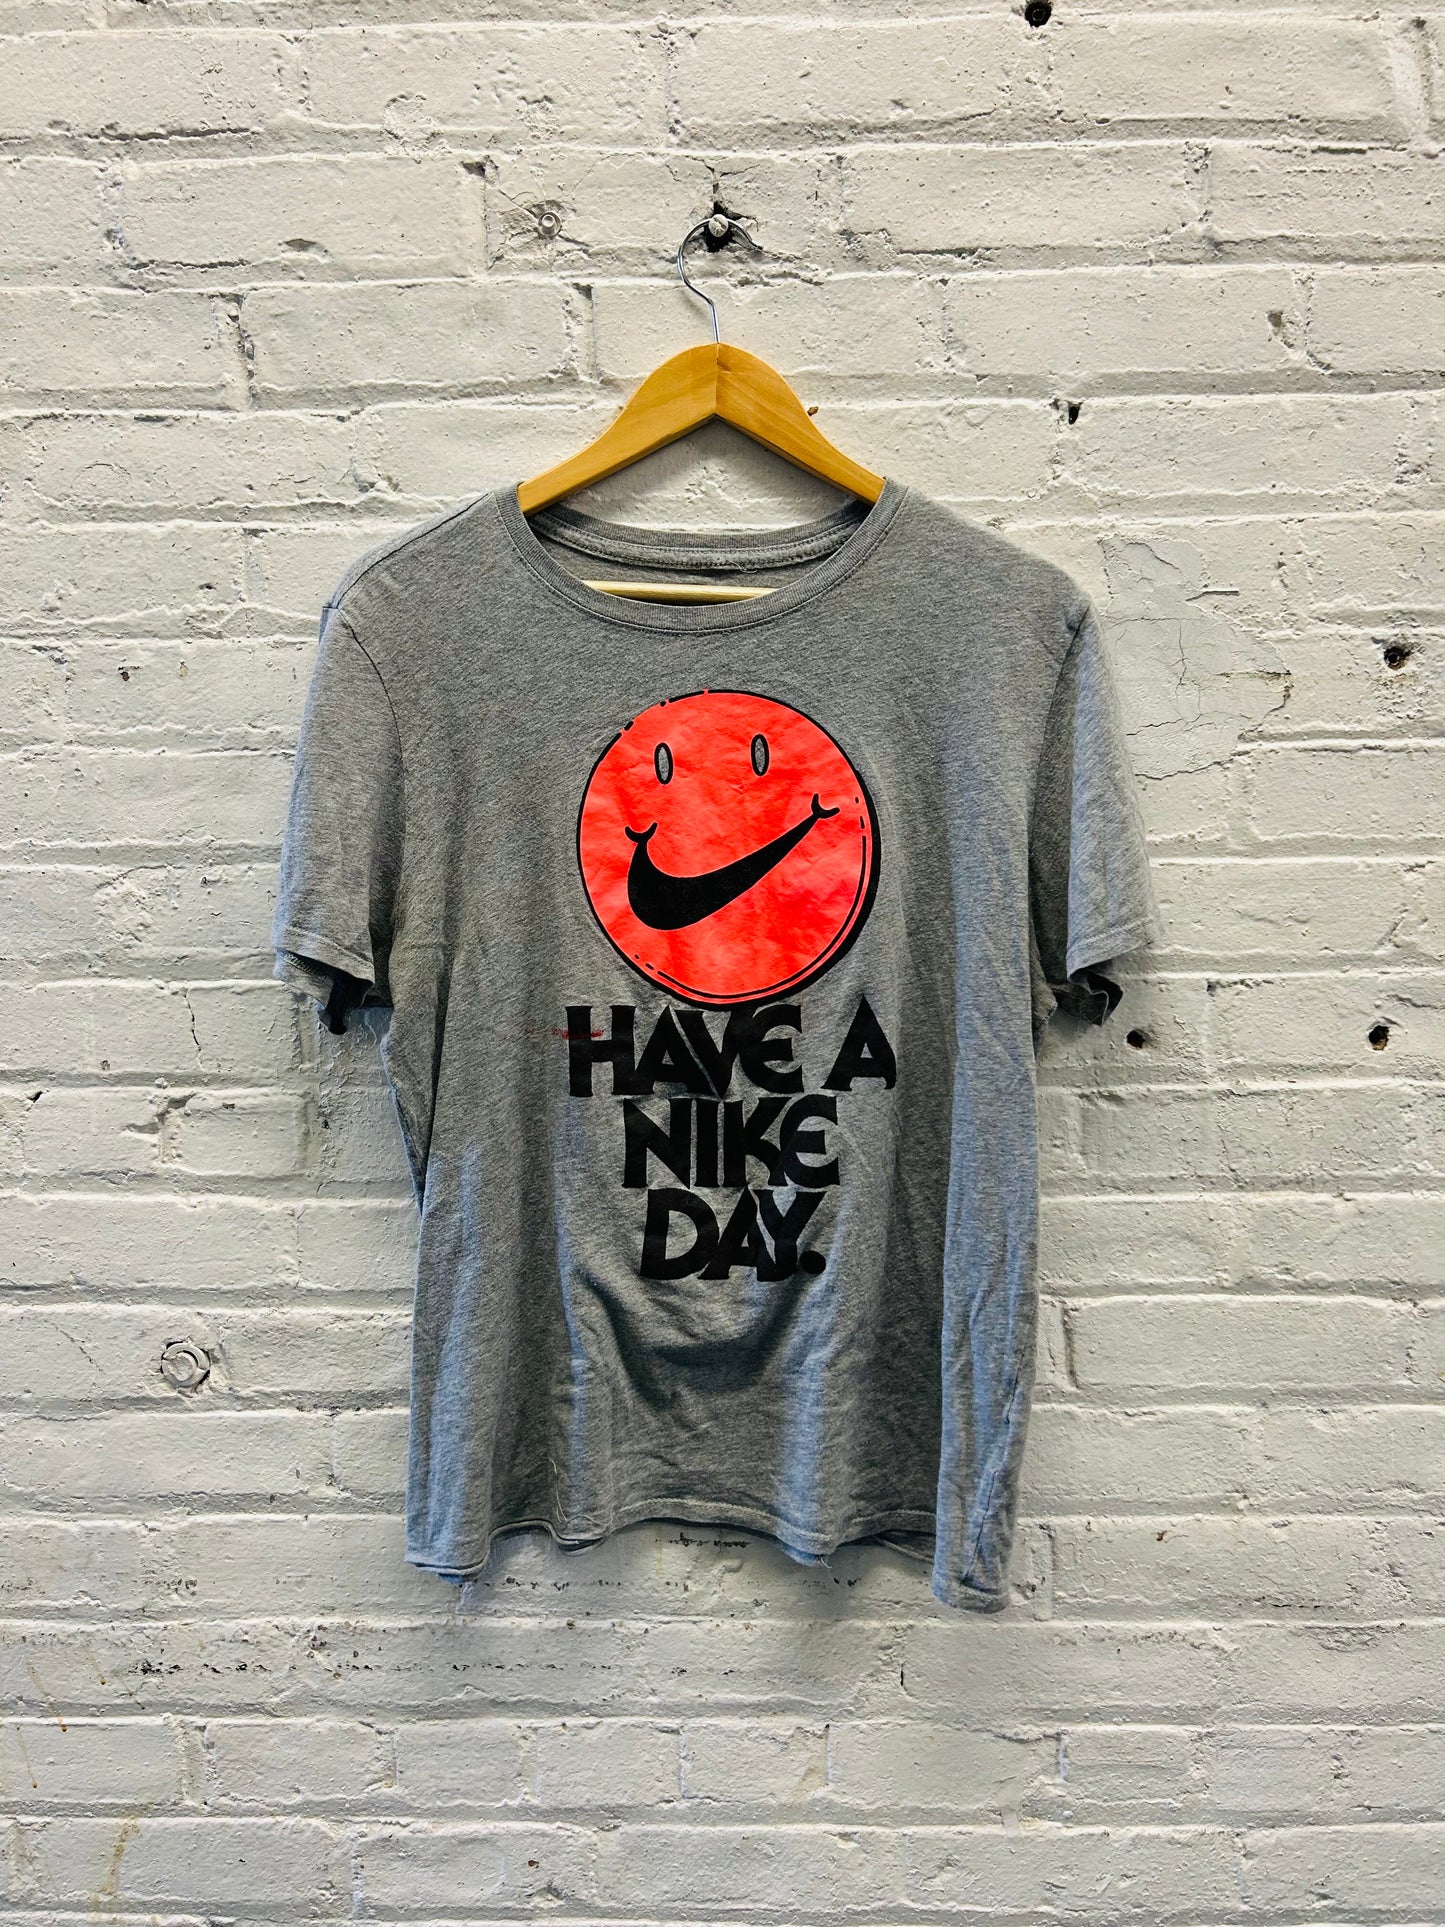 Have a Nike Day Tee - Medium